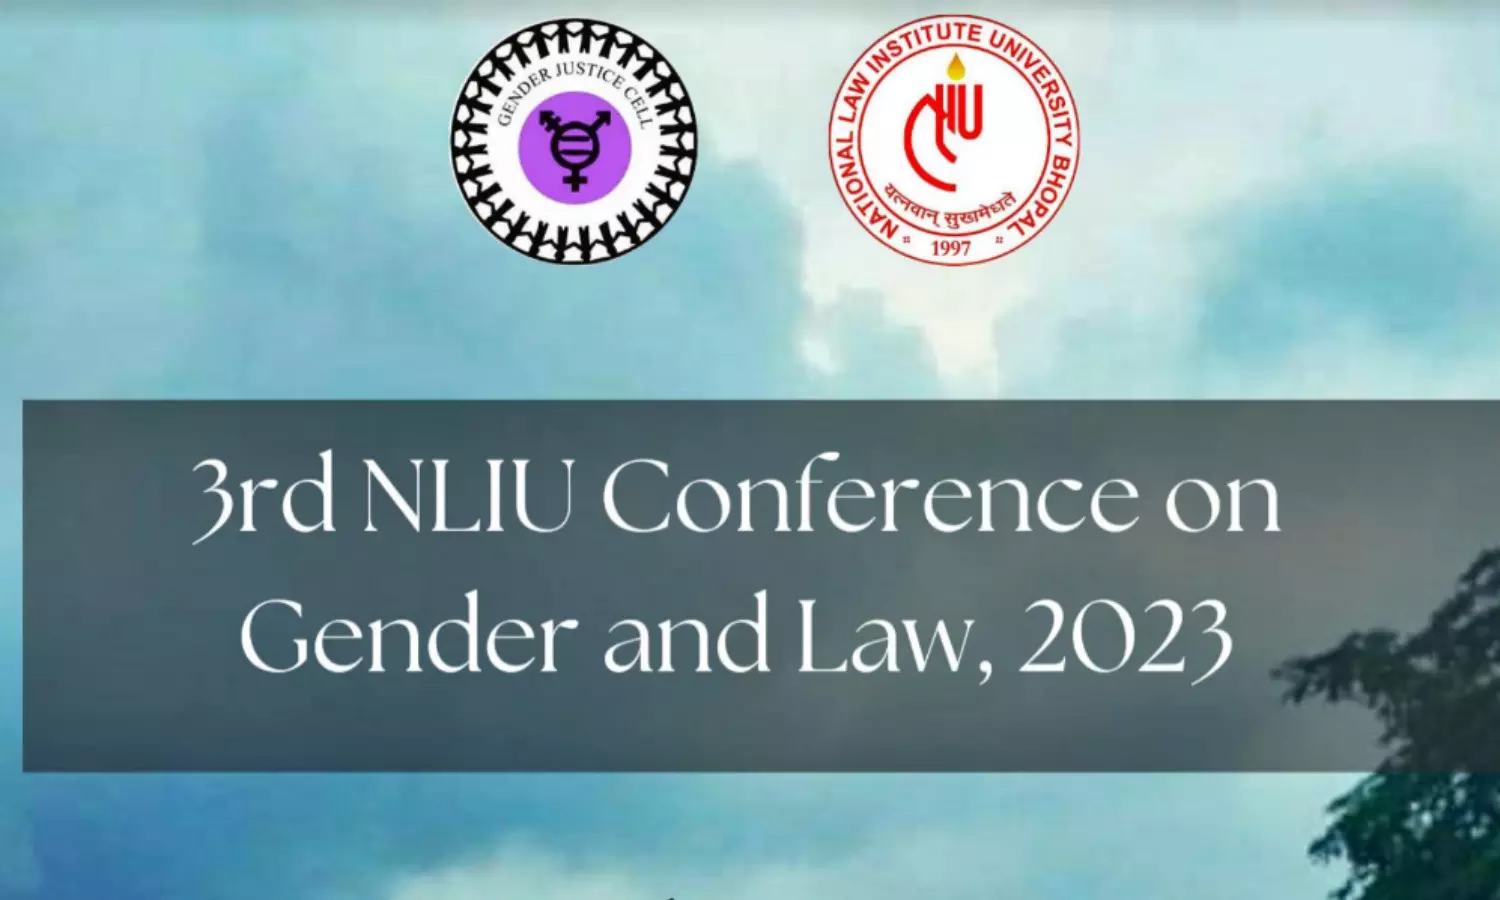 Call for Papers | 3rd NLIU Conference on Gender and Law 2023 | Submit Abstracts by 13 January, 2023